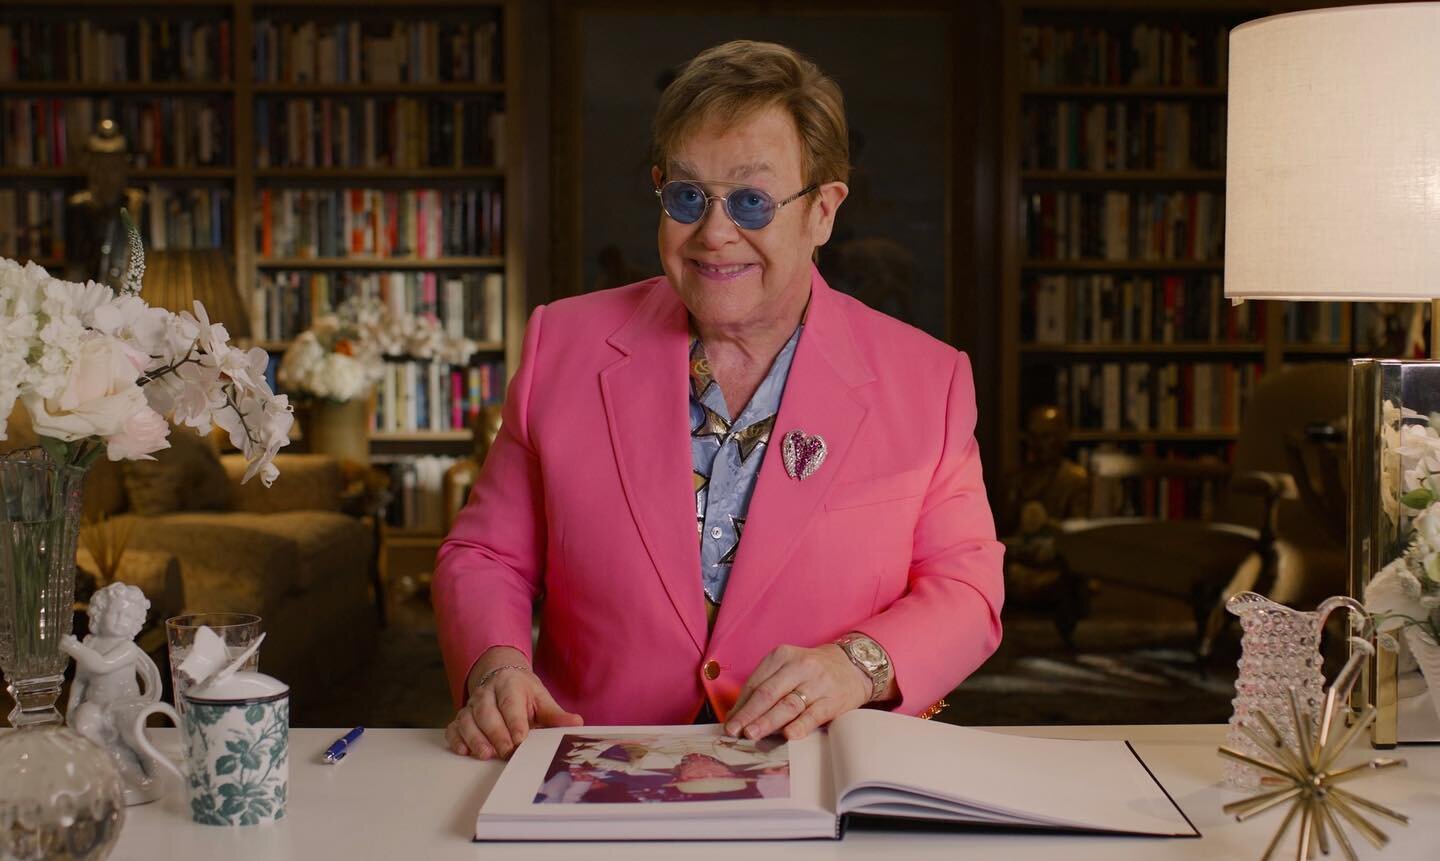 Sir Elton John ;)
From all the Life in Looks episodes I&rsquo;ve worked on for @voguemagazine this has been one of my favorites so far.

Props to the amazing team behind it: Luke Spencer, @jerocchi @marcostardust and GFX @leakichler 

#eltonjohn